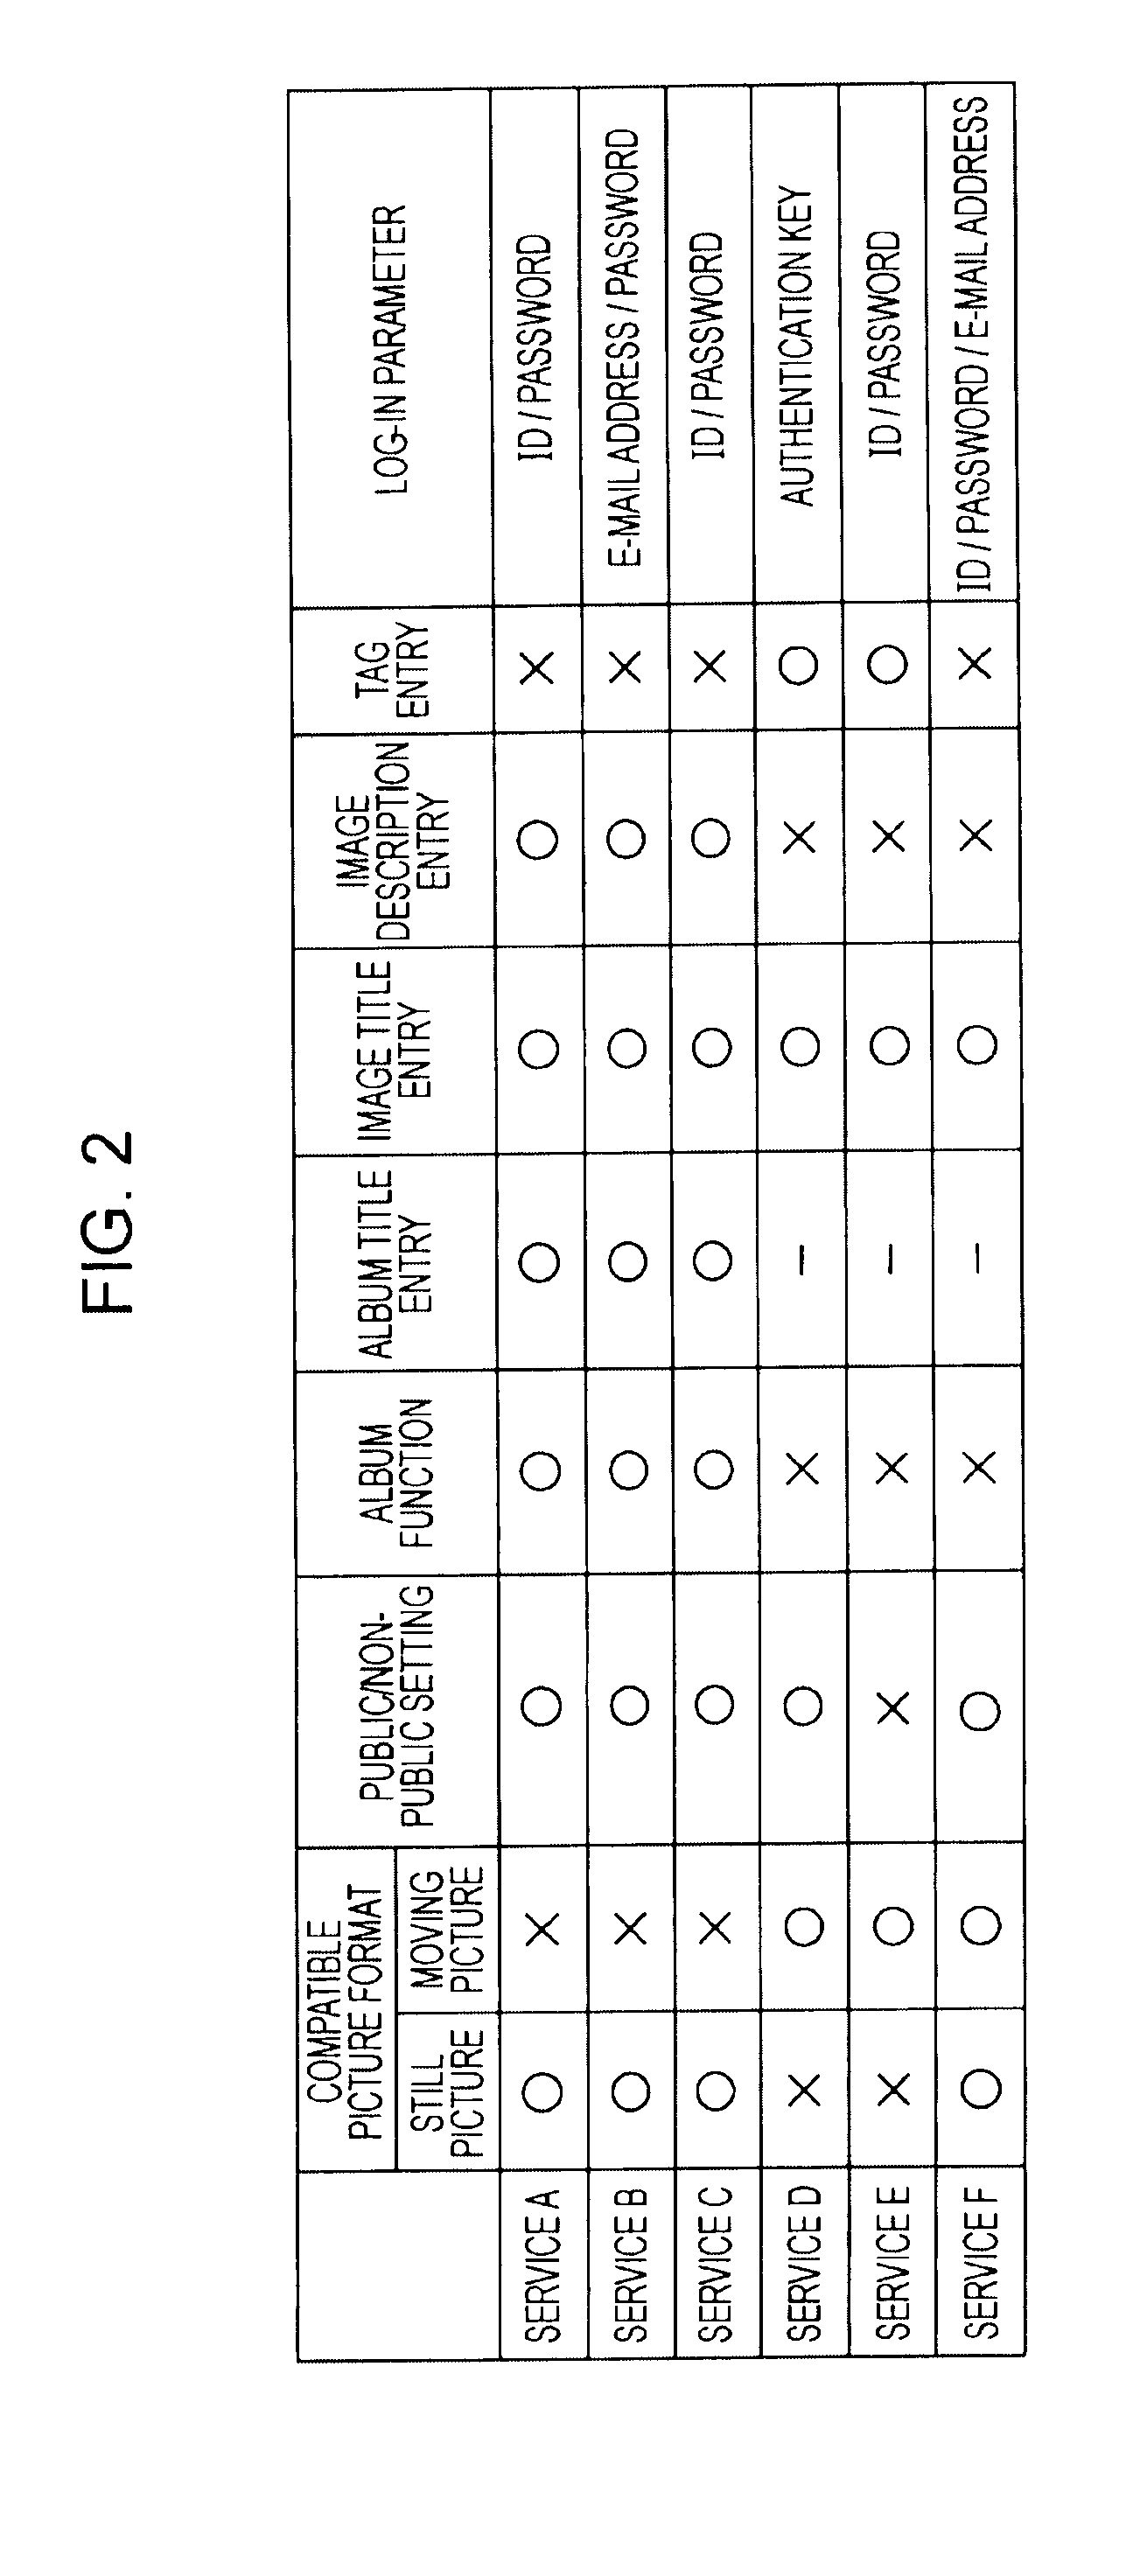 Client device, information processing system and associated methodology of accessing networked services